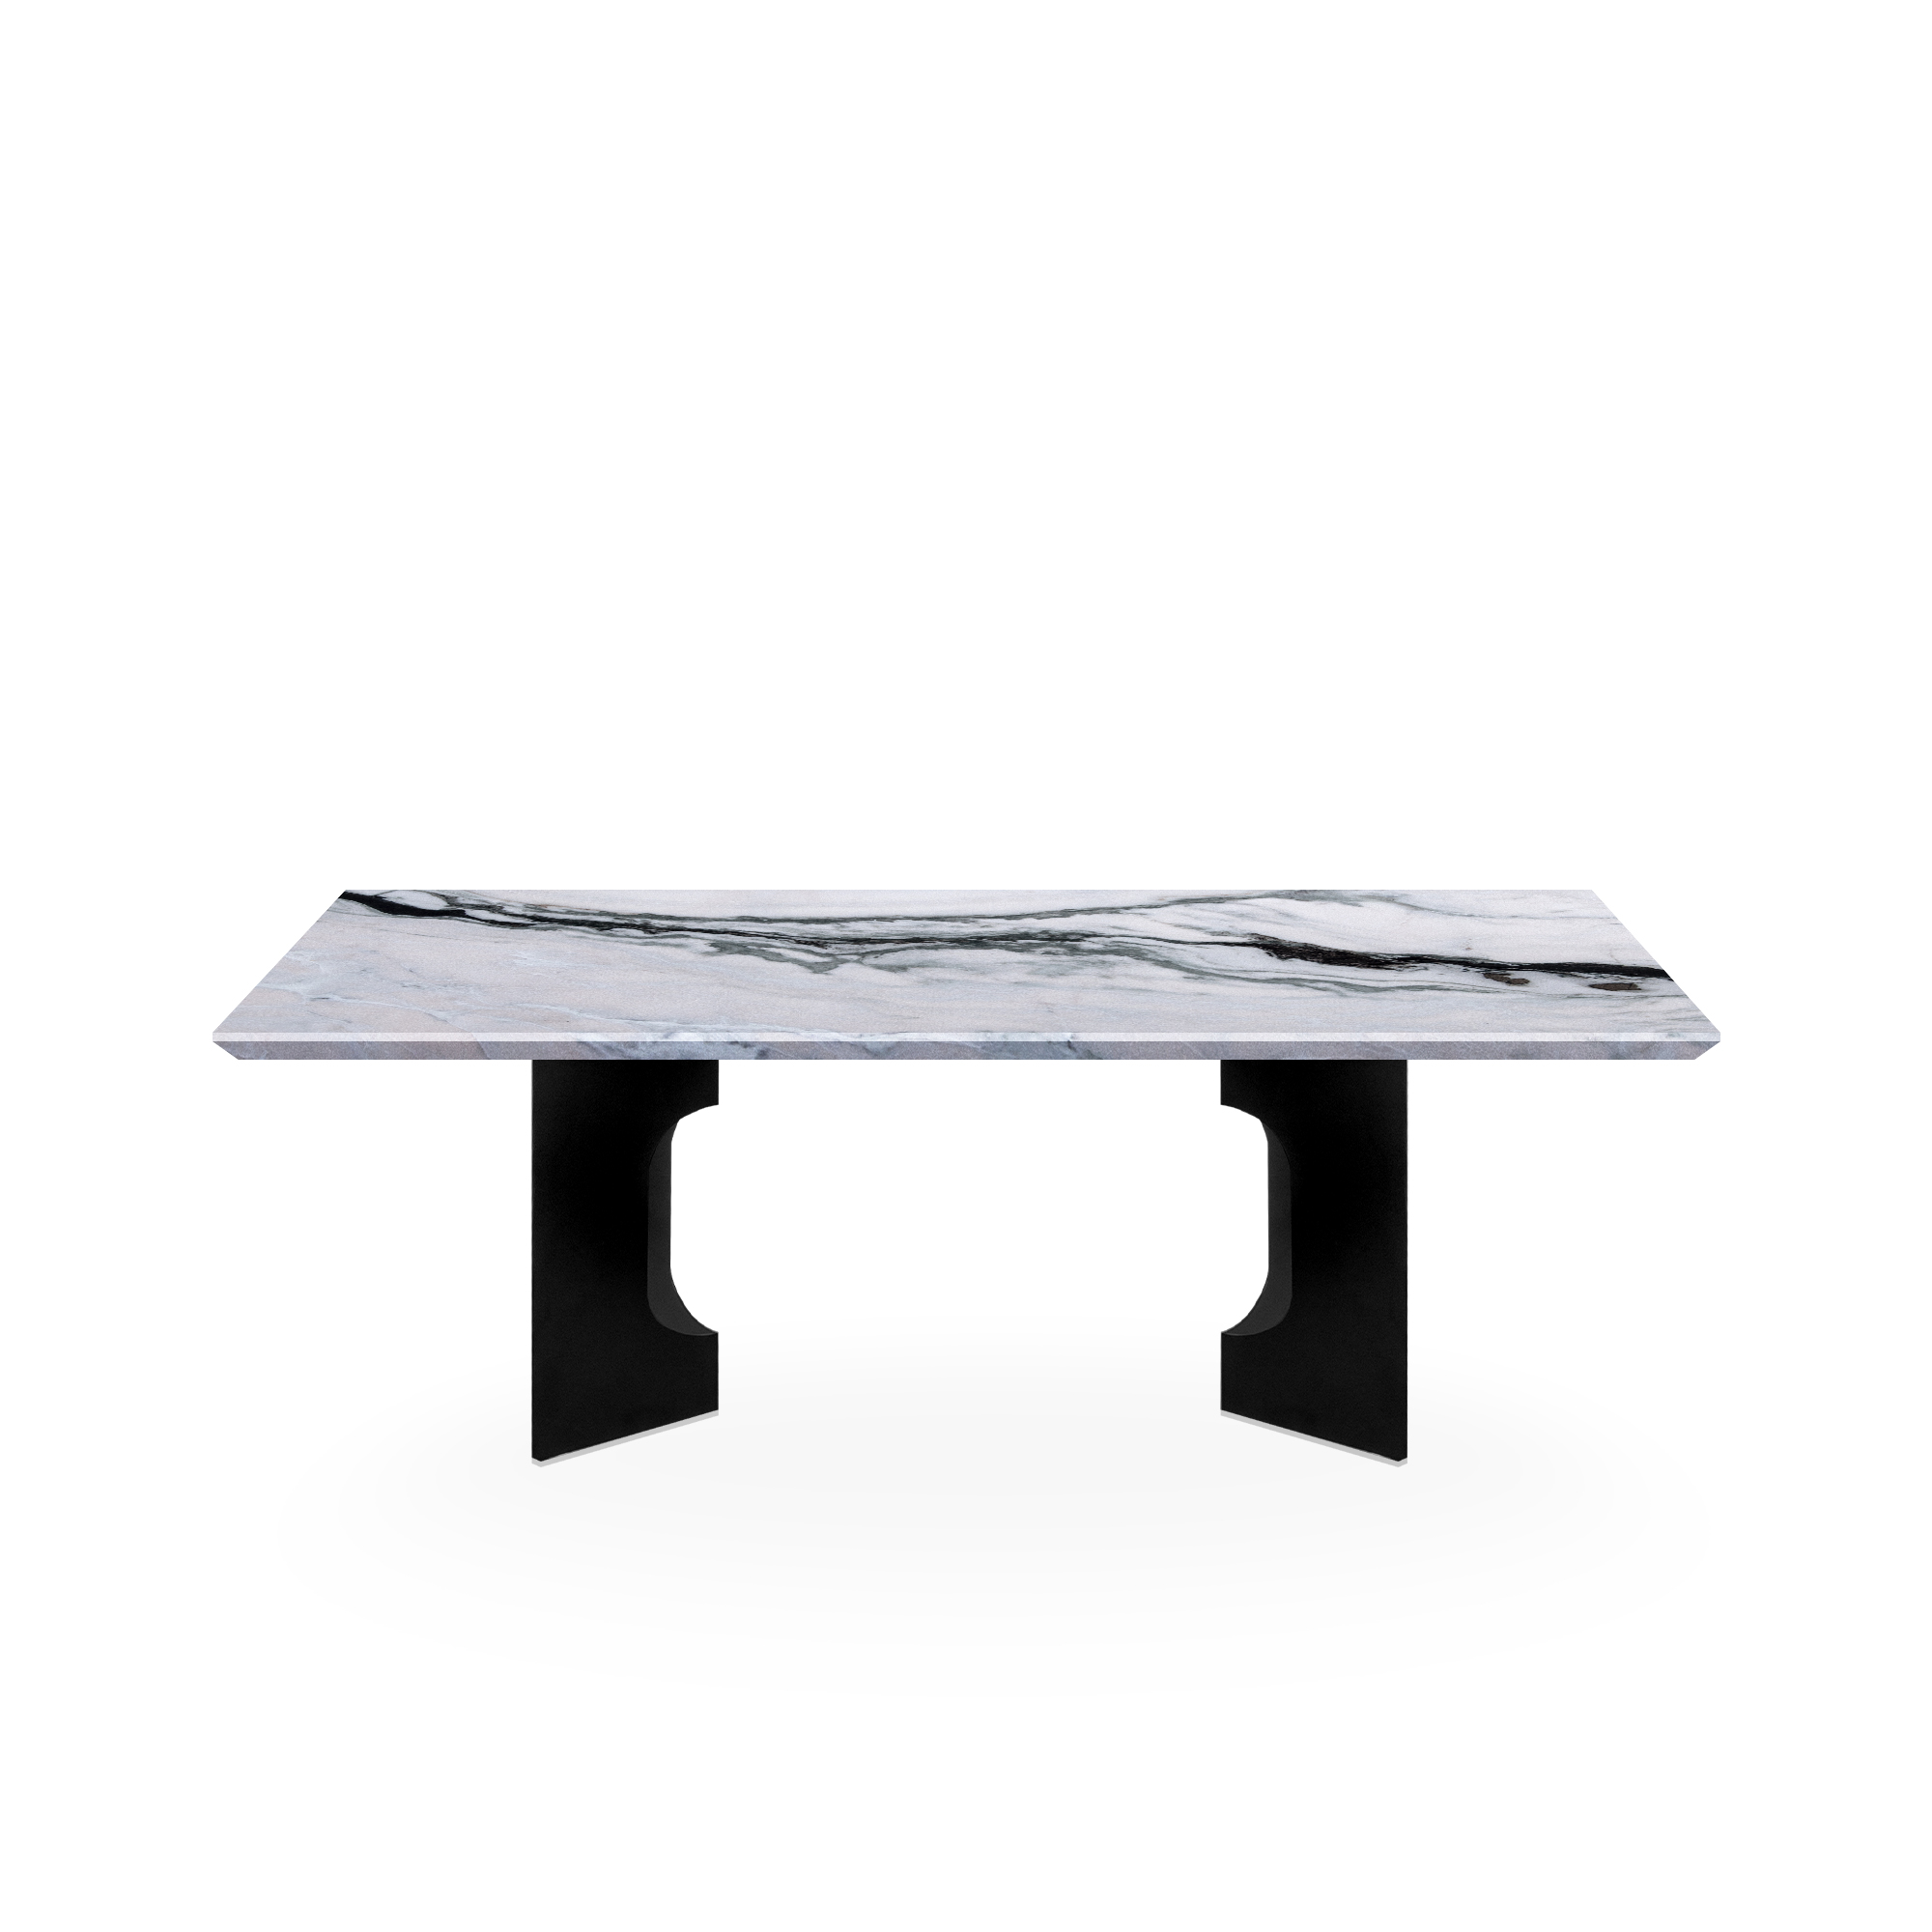 UMBRA | Decasa Marble Marble Dining Table